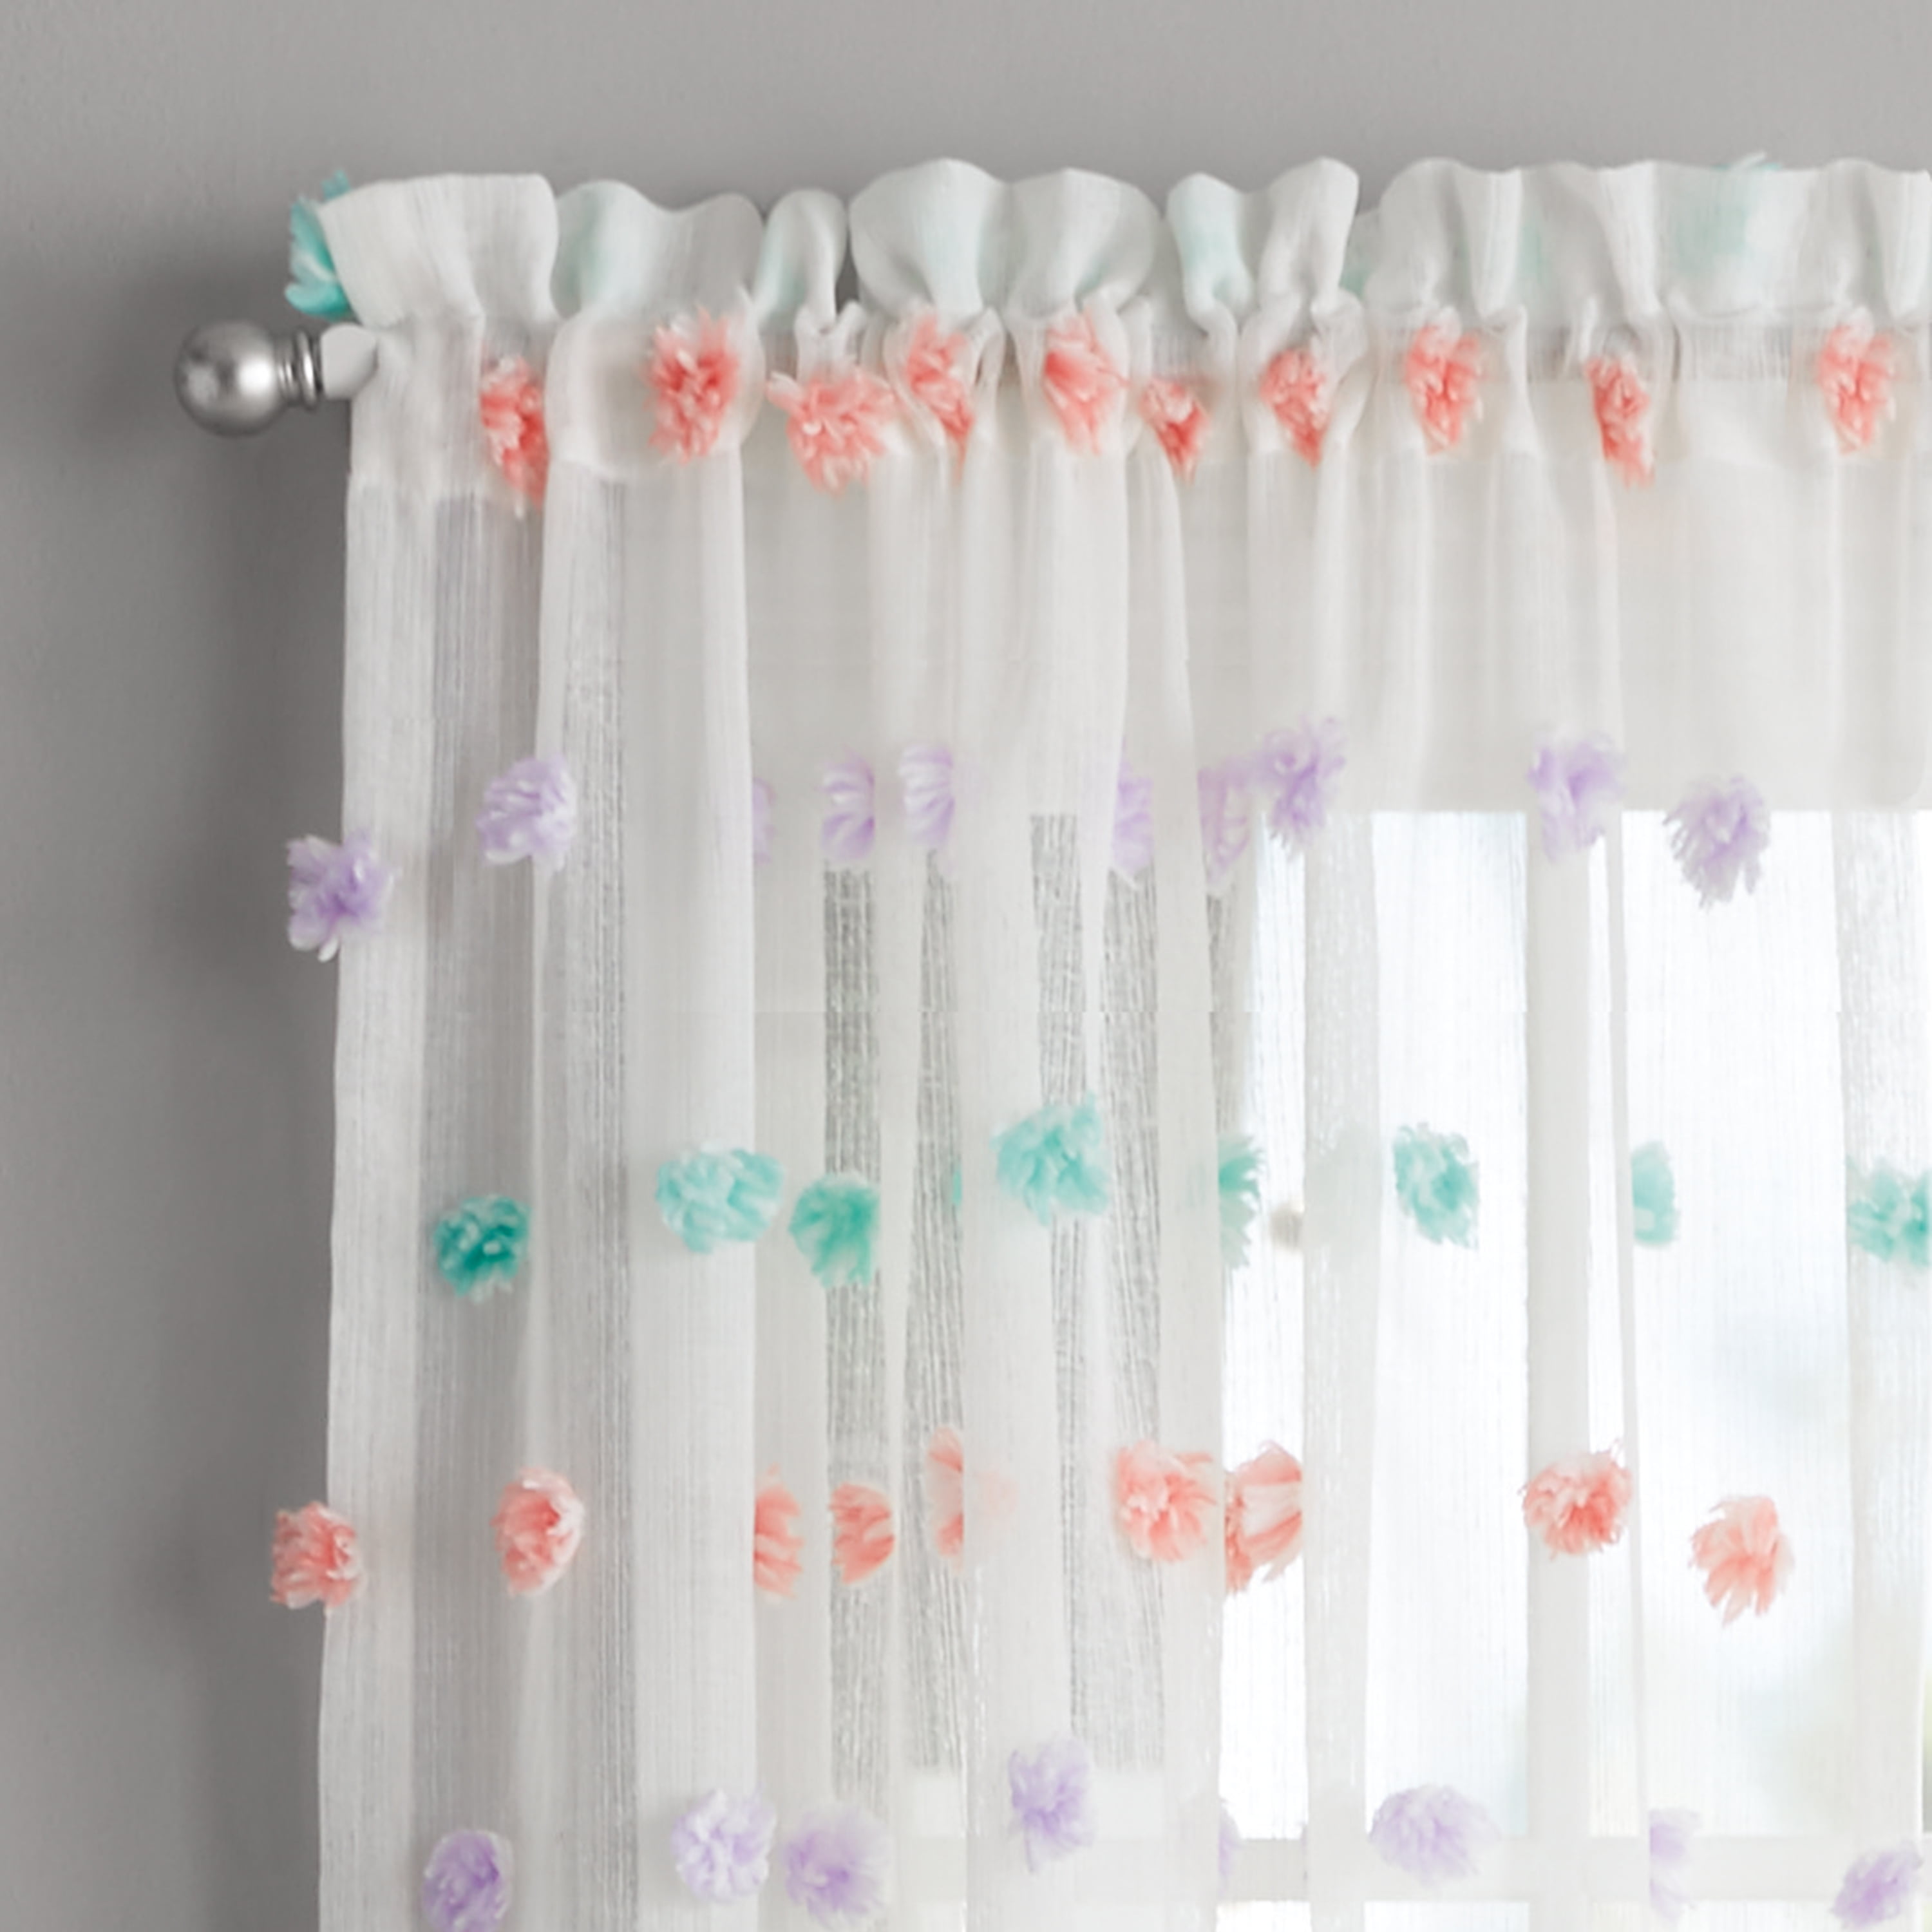 Pom pom curtains and curtain tricks you might not know – House Mix